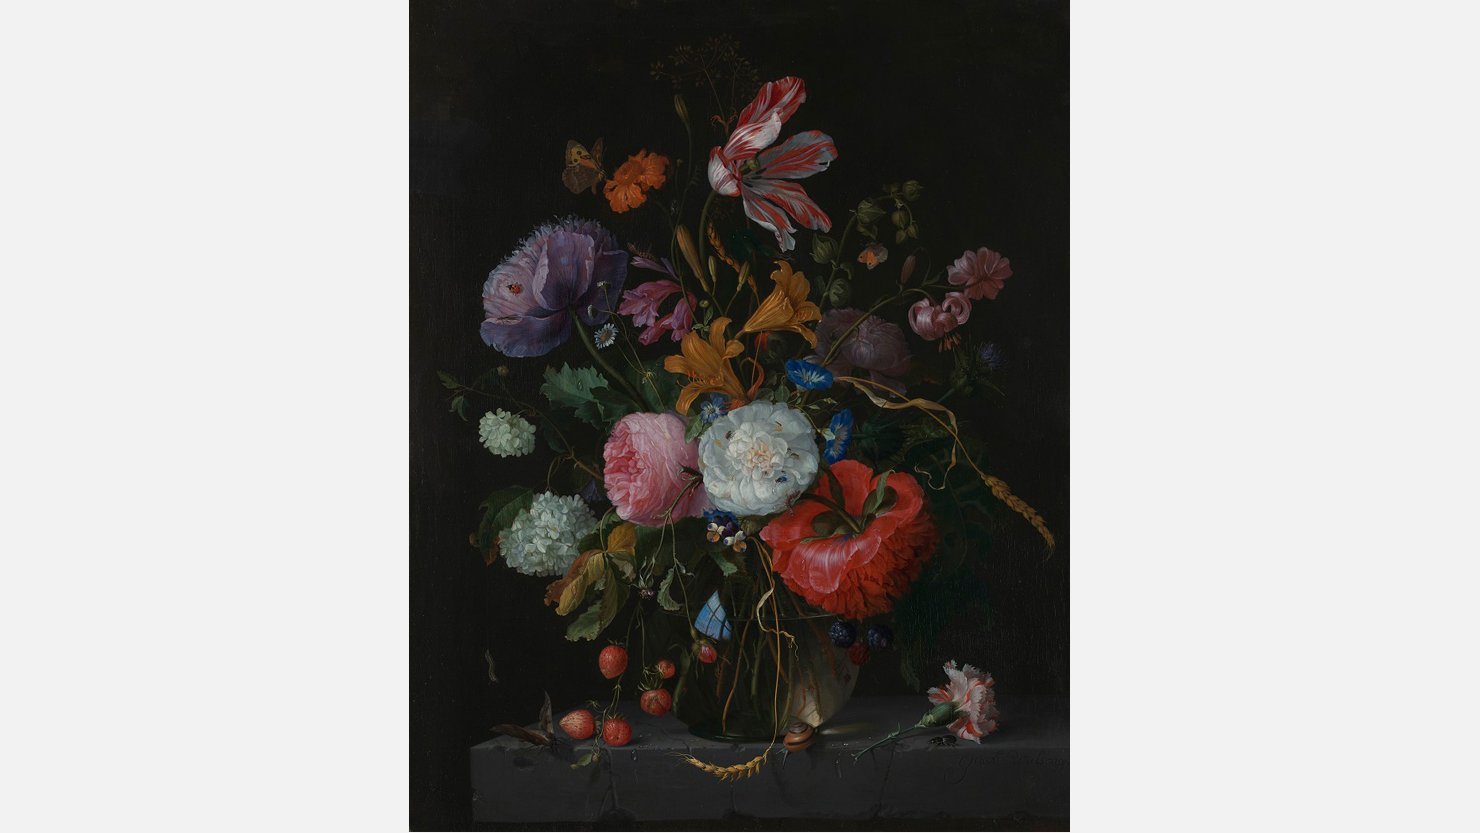 Jacob van Walscapelle, 1644-1727 Flowers in a Glass Vase, about 1670 © The National Gallery, London